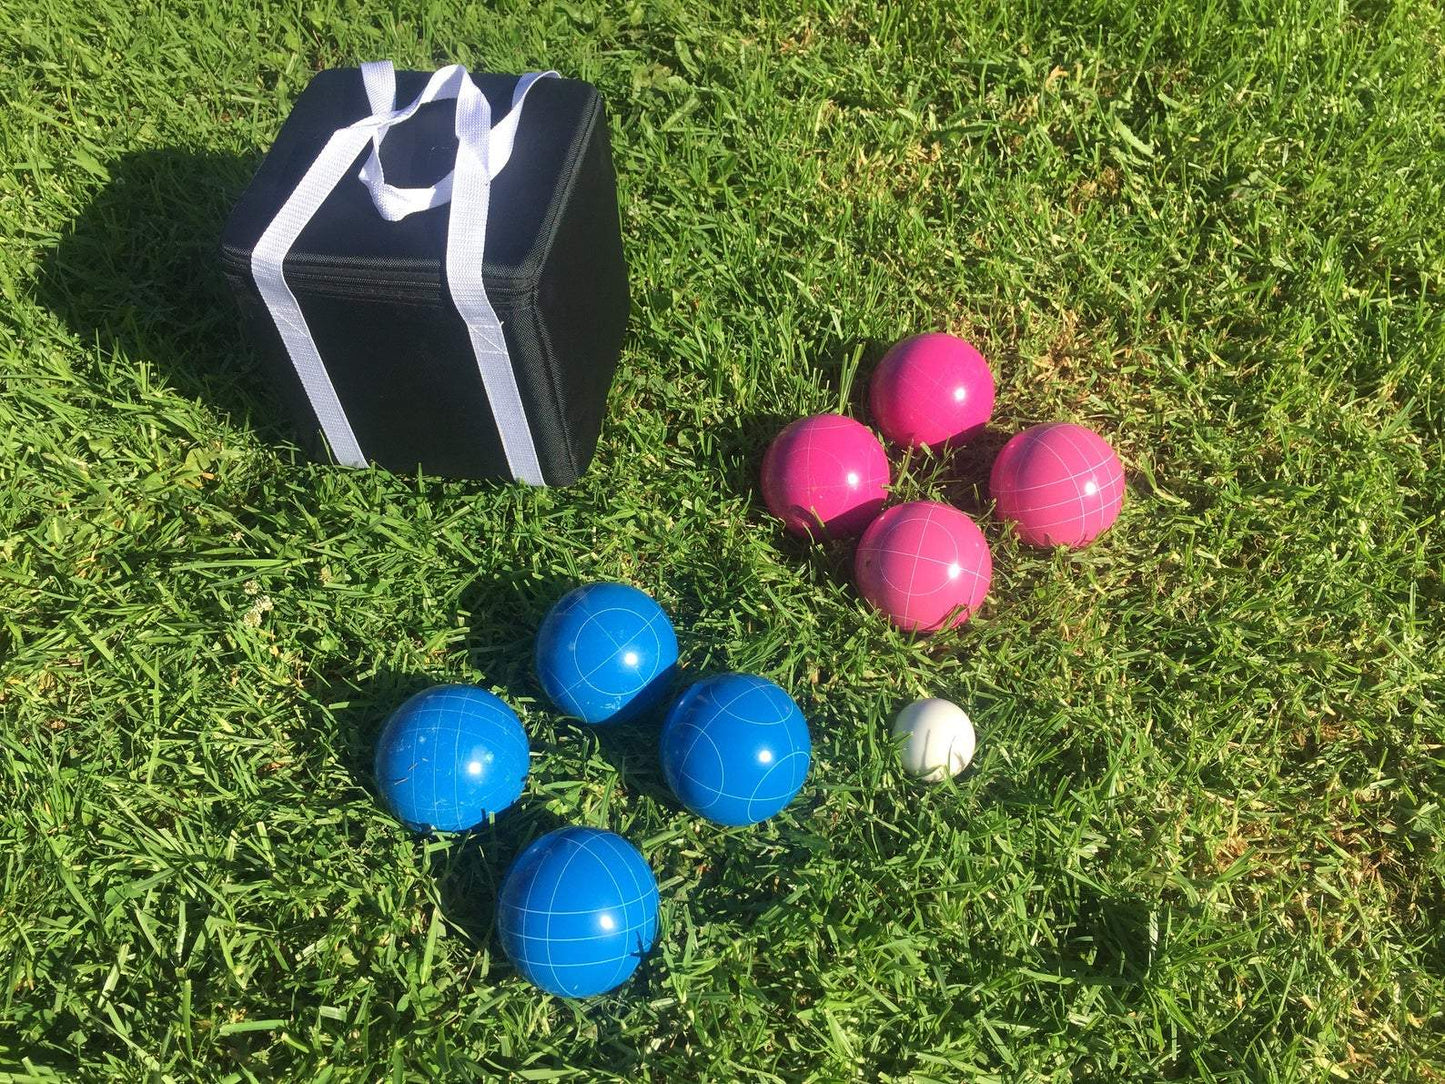 107mm Bocce Blue and Pink Balls with Black Bag